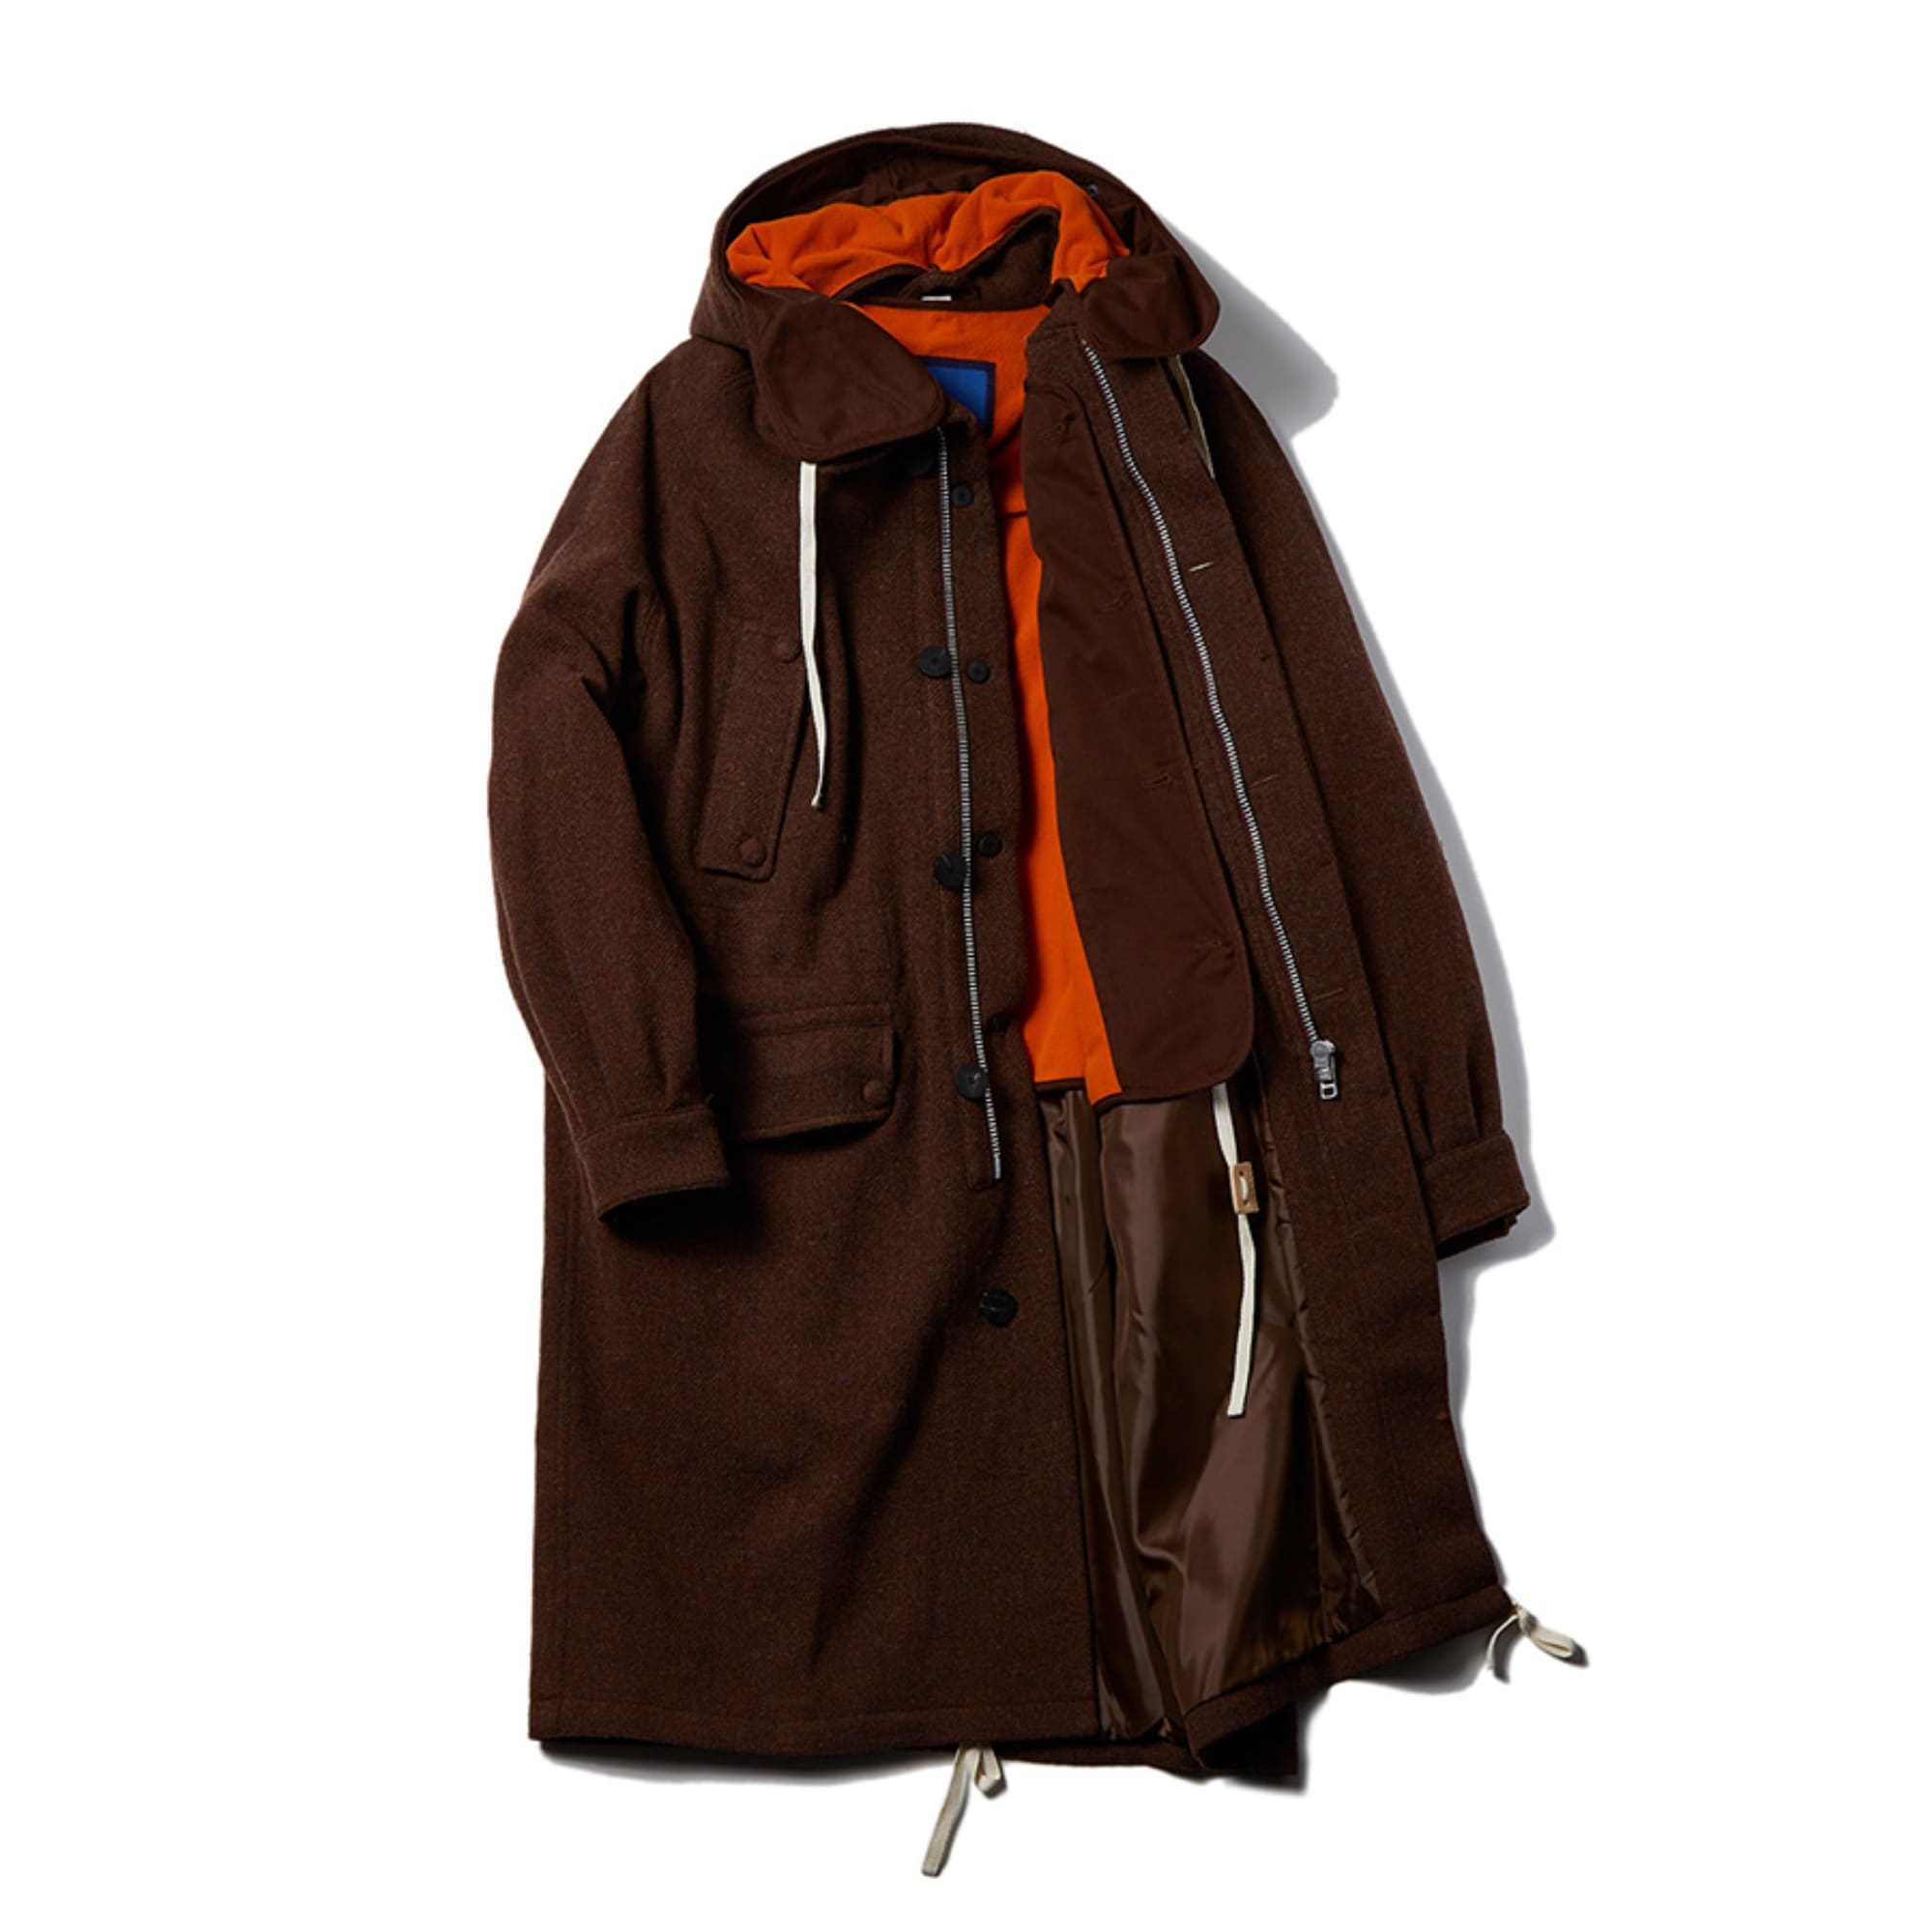 THE DOCUMENT WOOL PARKA (BROWN)